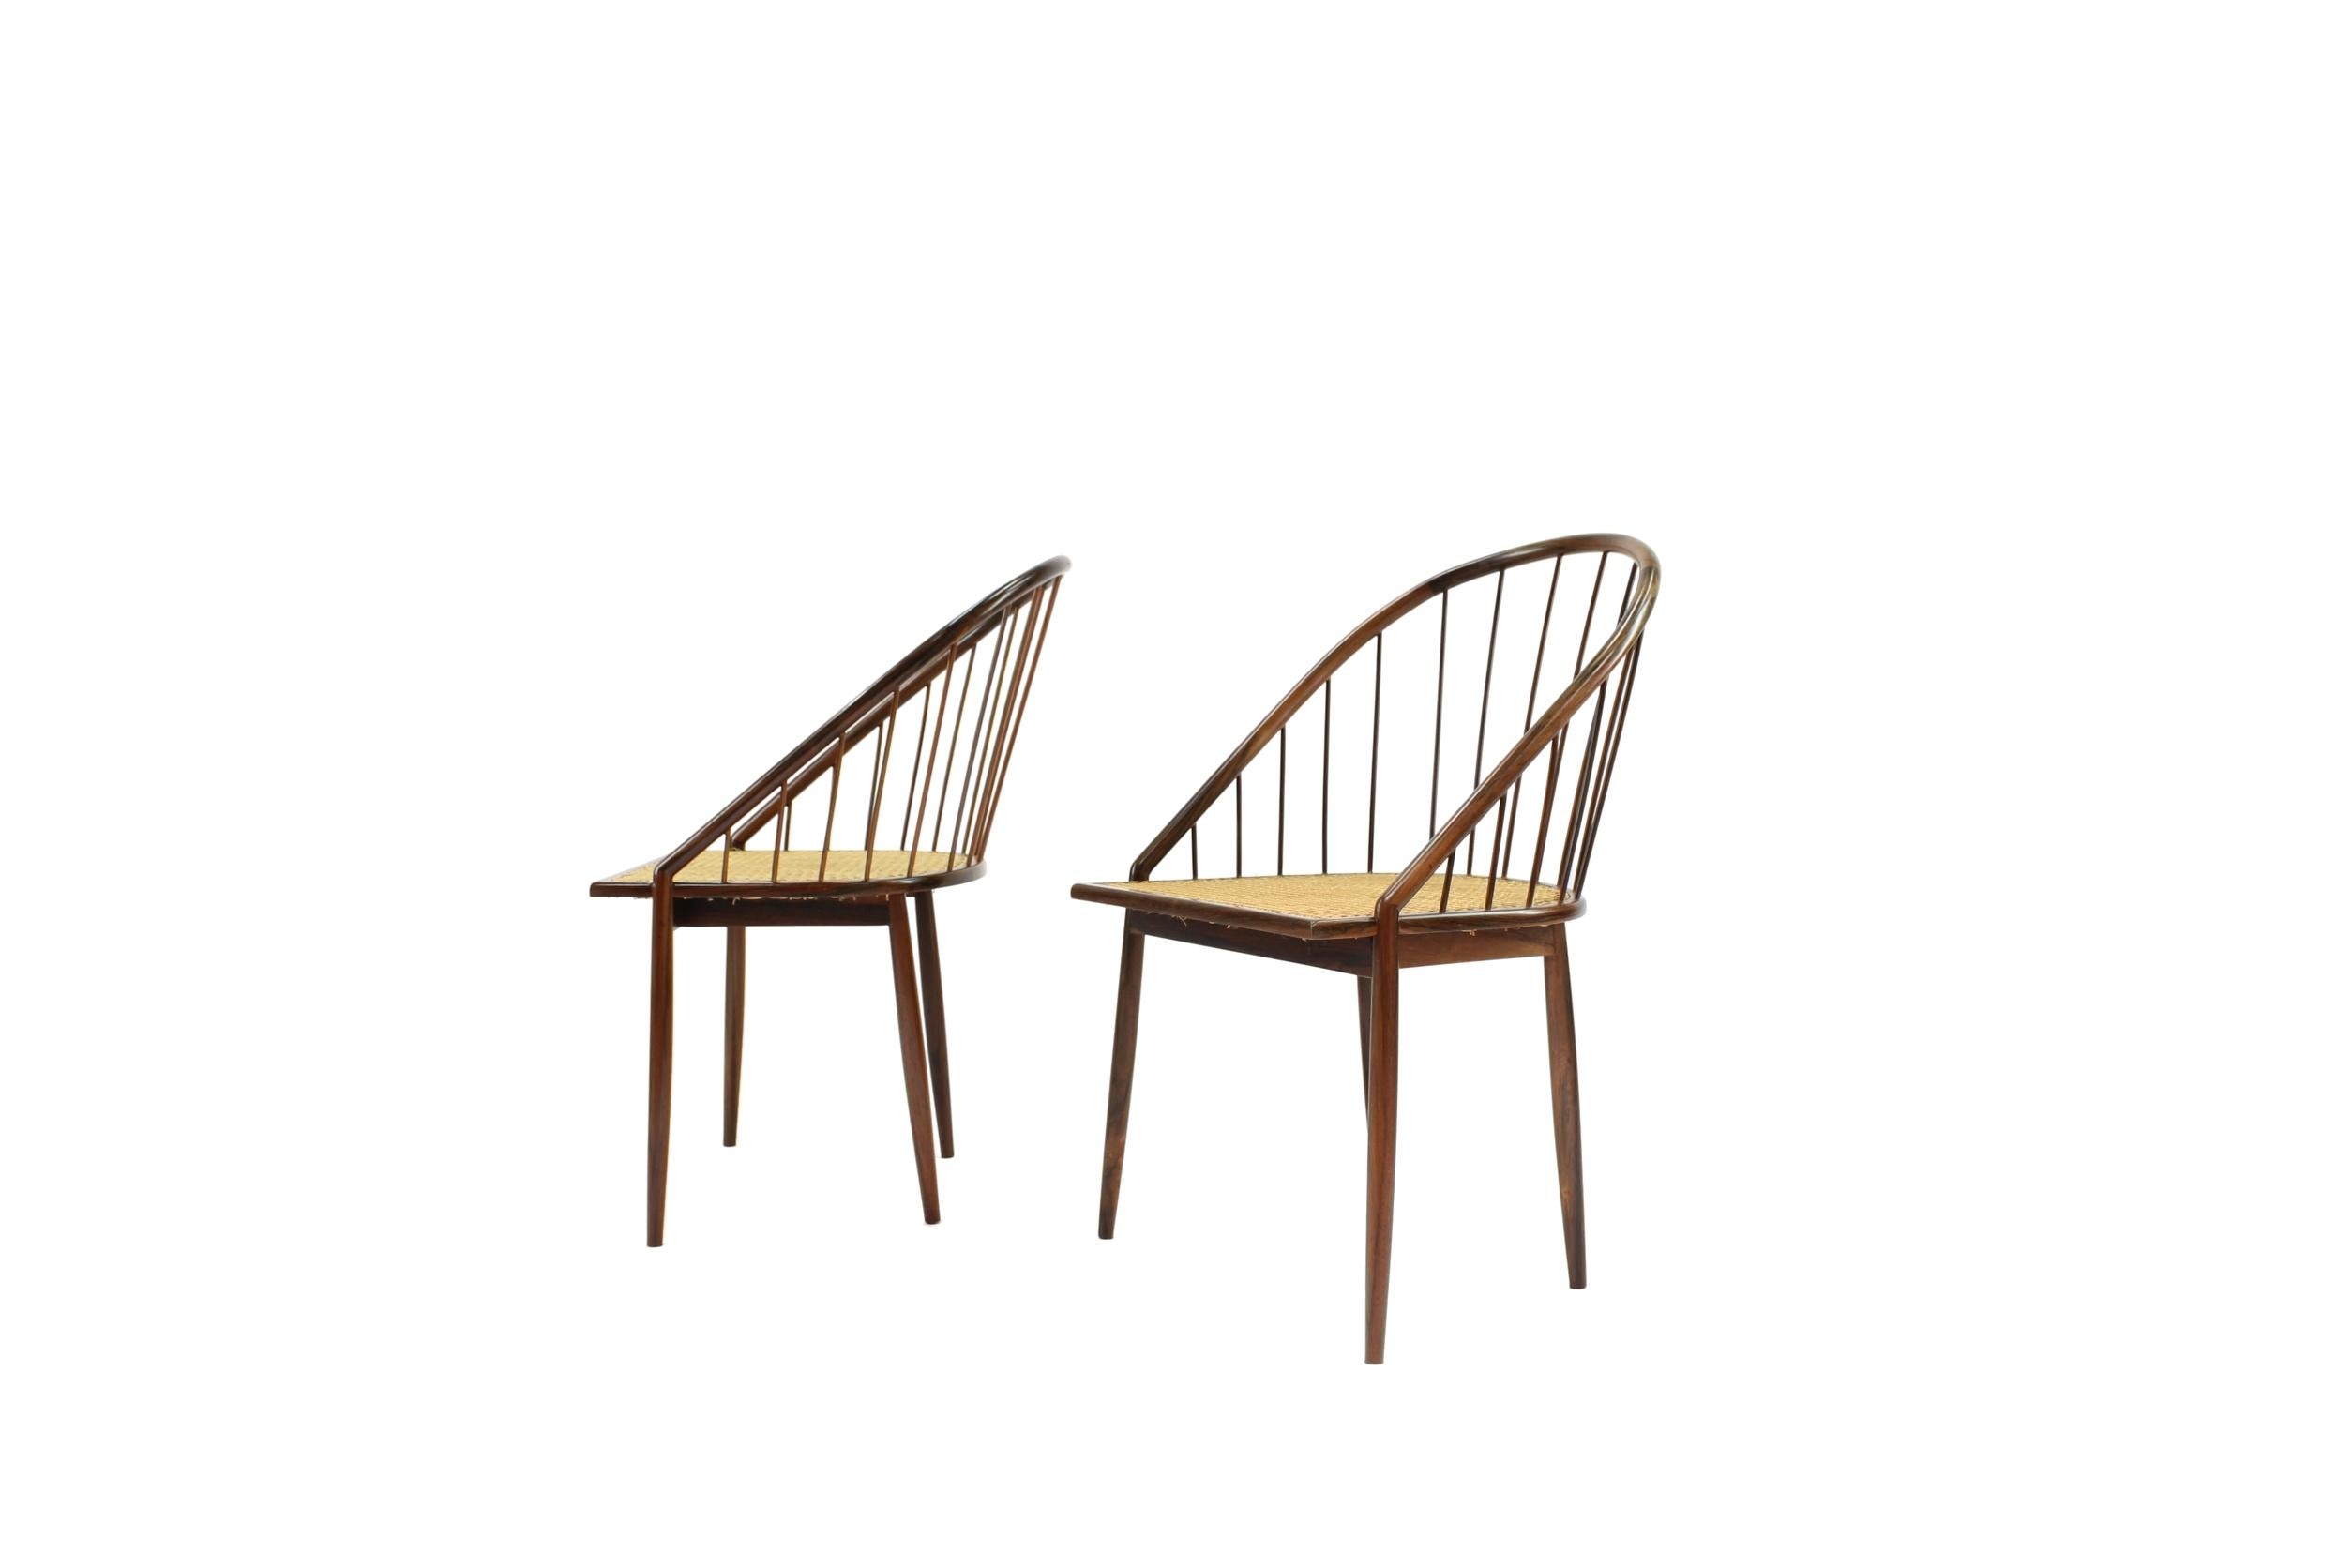 Introducing the exquisite Brazilian modern 'curva' chairs, expertly crafted by the renowned artisan Joaquim Tenreiro in the vibrant era of the 1960s in Brazil. With their timeless appeal, these chairs effortlessly harmonize with Mid-Century Modern